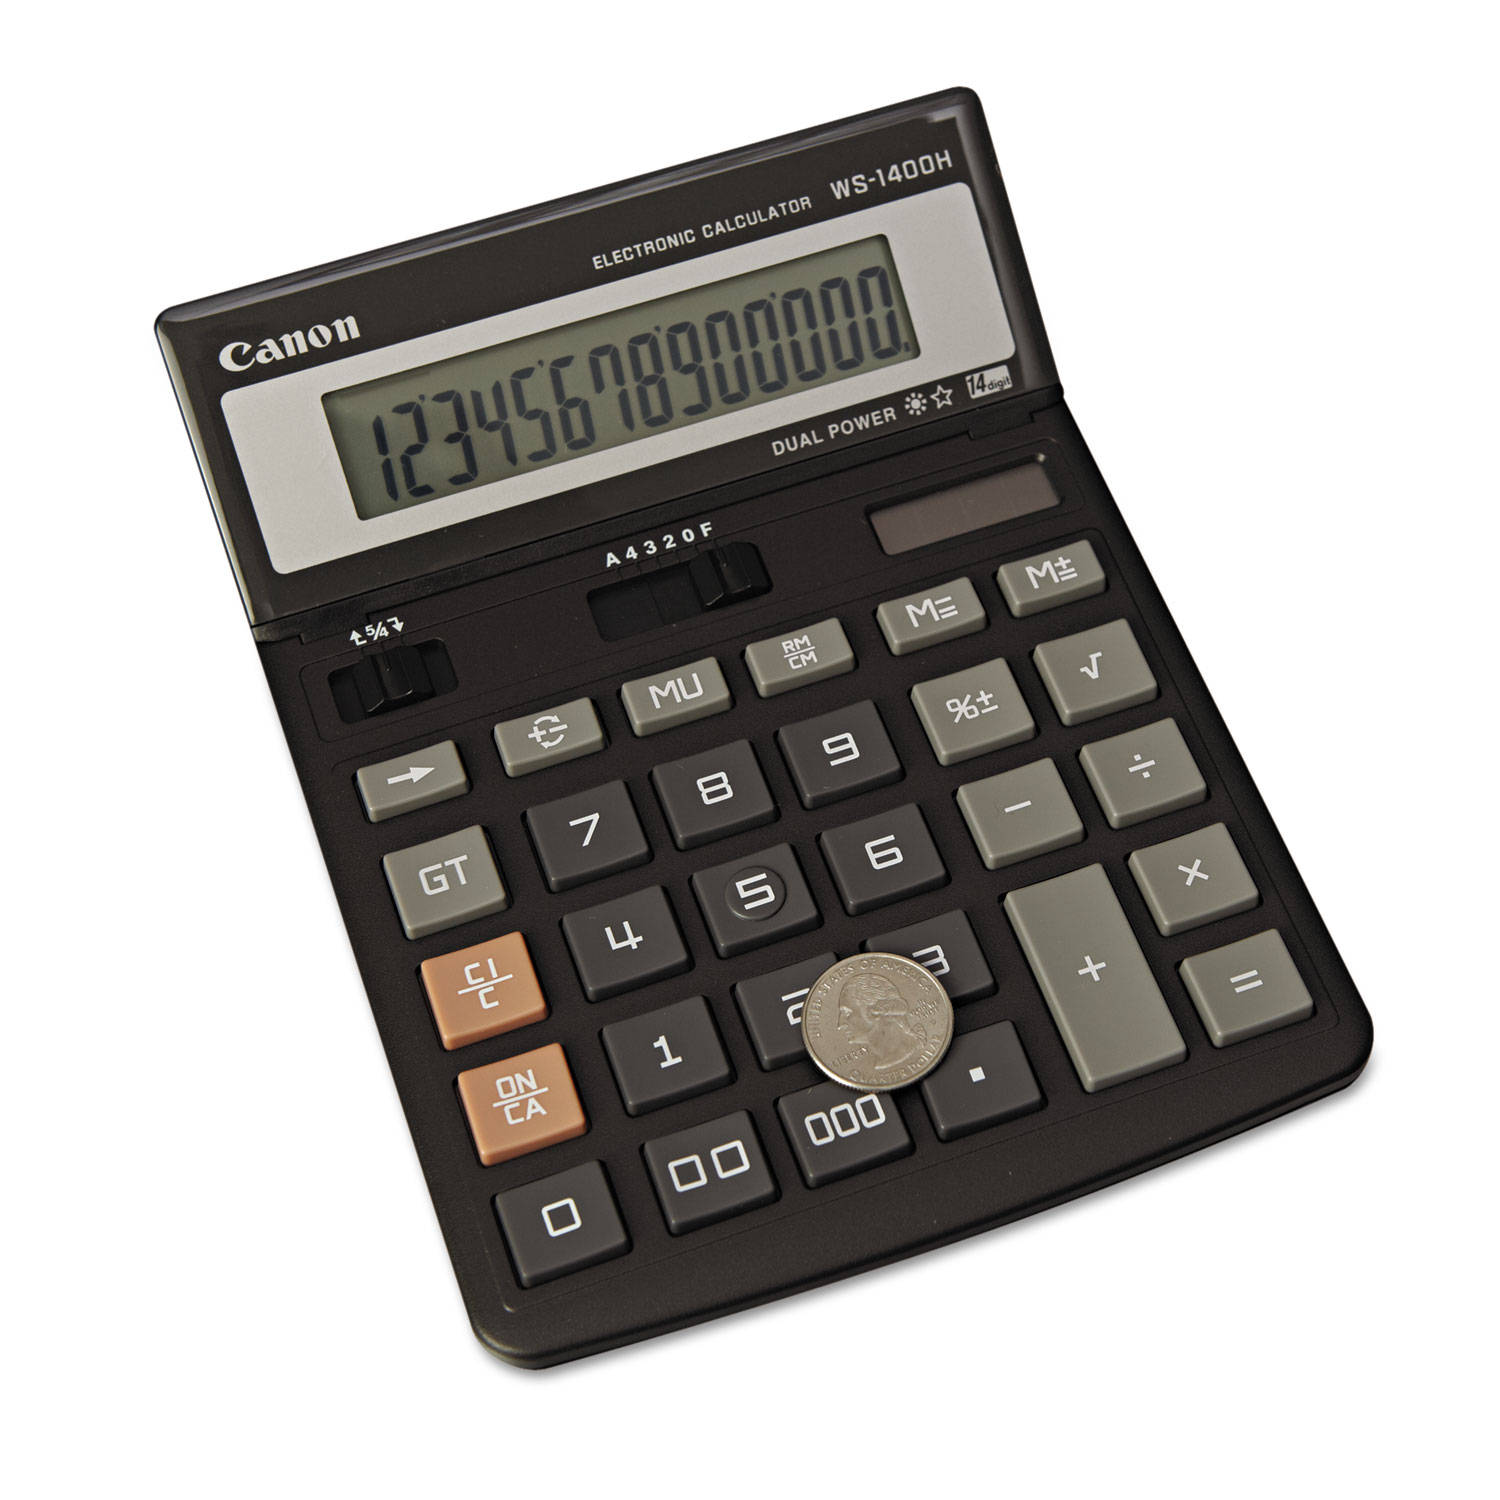  Canon 4087A005 WS1400H Display Calculator, 14-Digit LCD (CNM4087A005AA) 